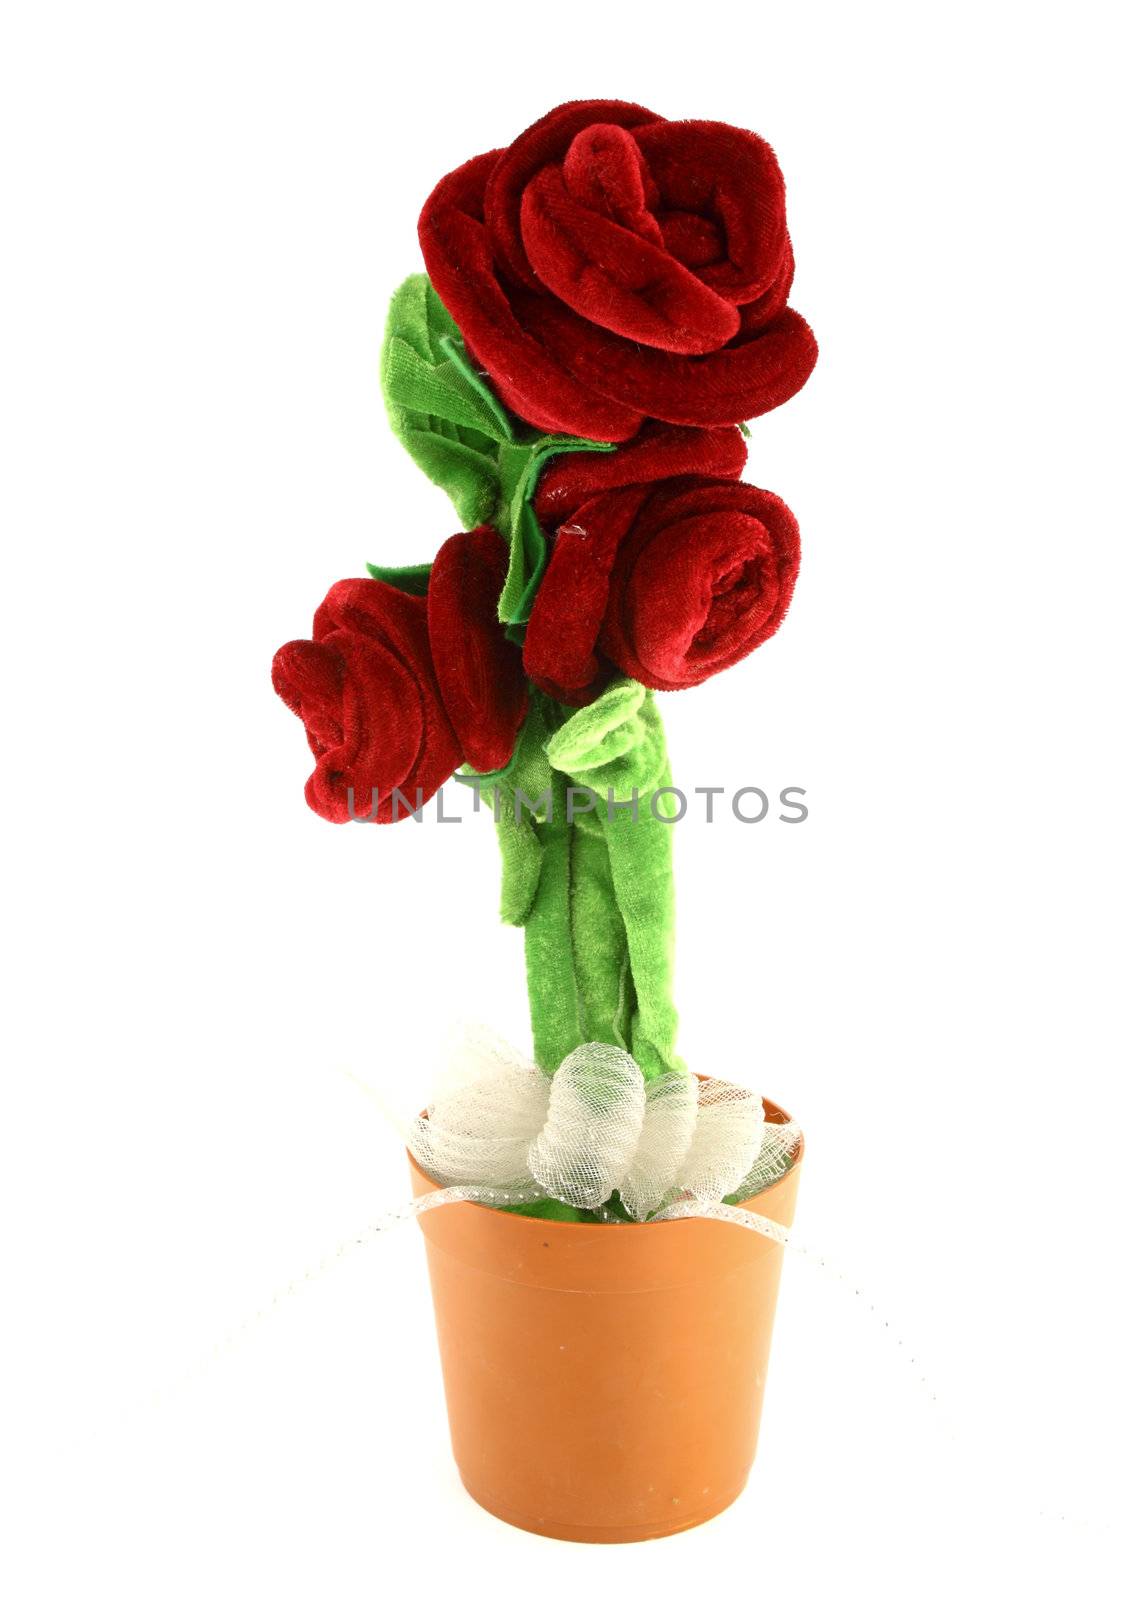 Rose made from wool fabric on white background by geargodz